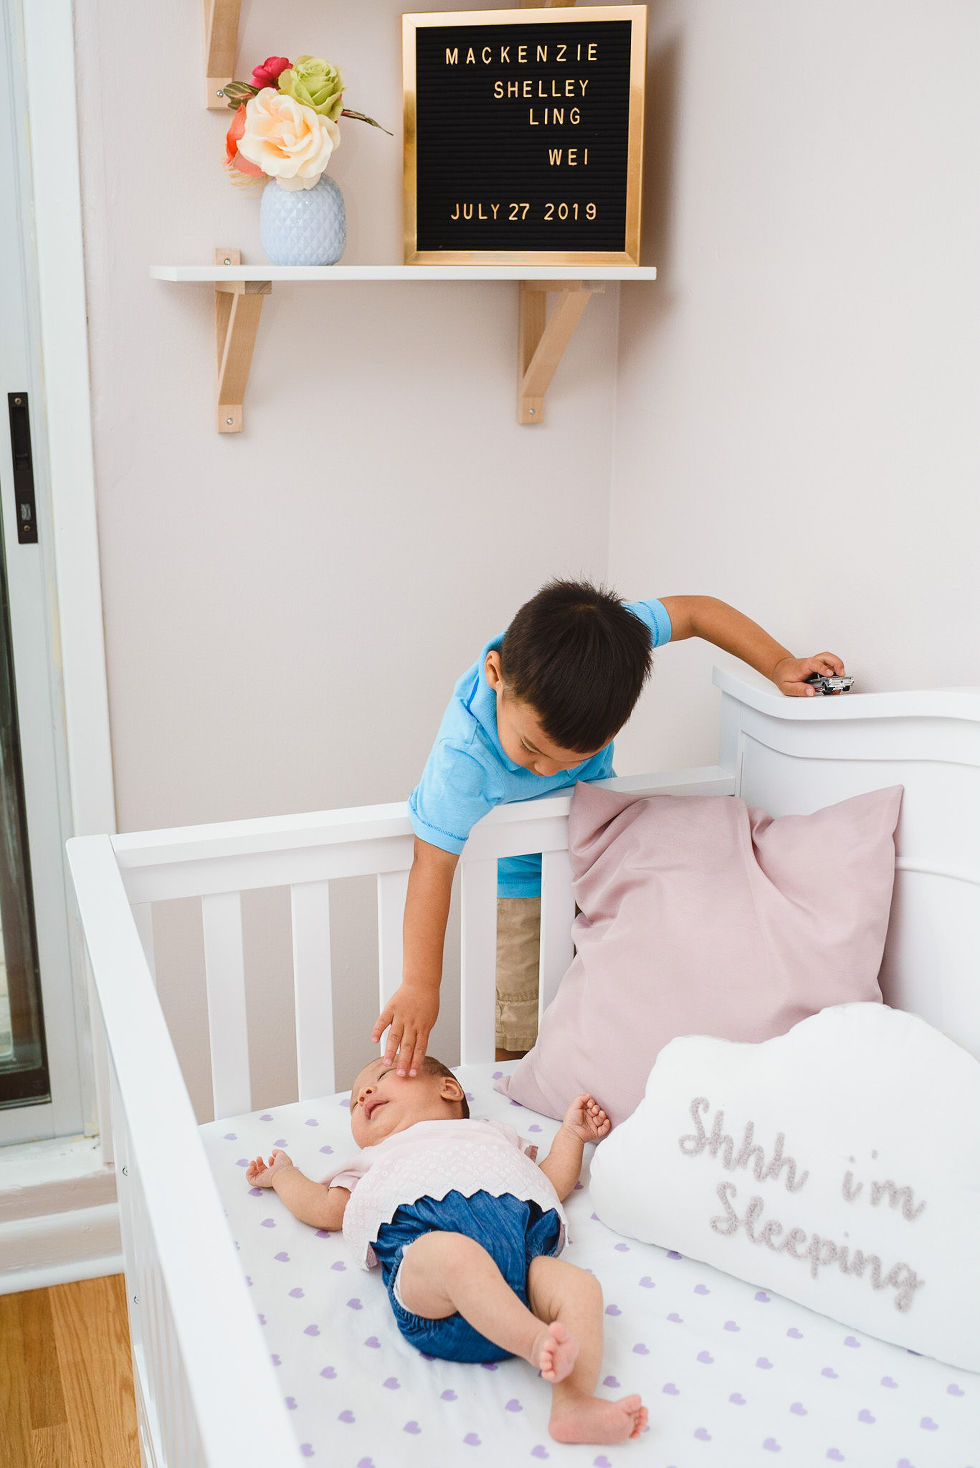 A toddler reaching into a crib to say hi to his baby sibling with a frame above the crib with a birth announcement on it Toronto family photography